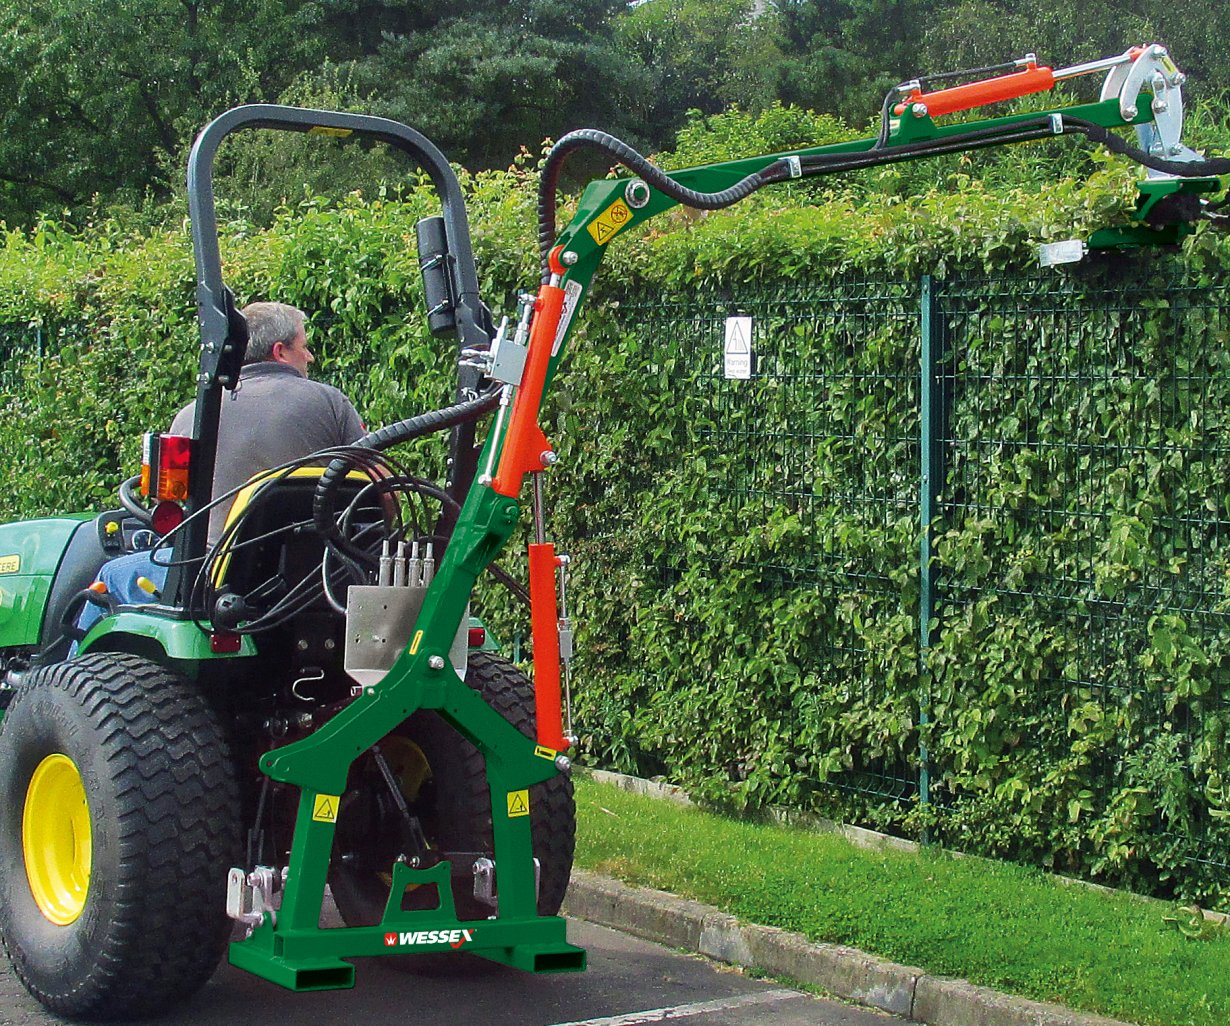 Wessex CHT Hedge Cutters